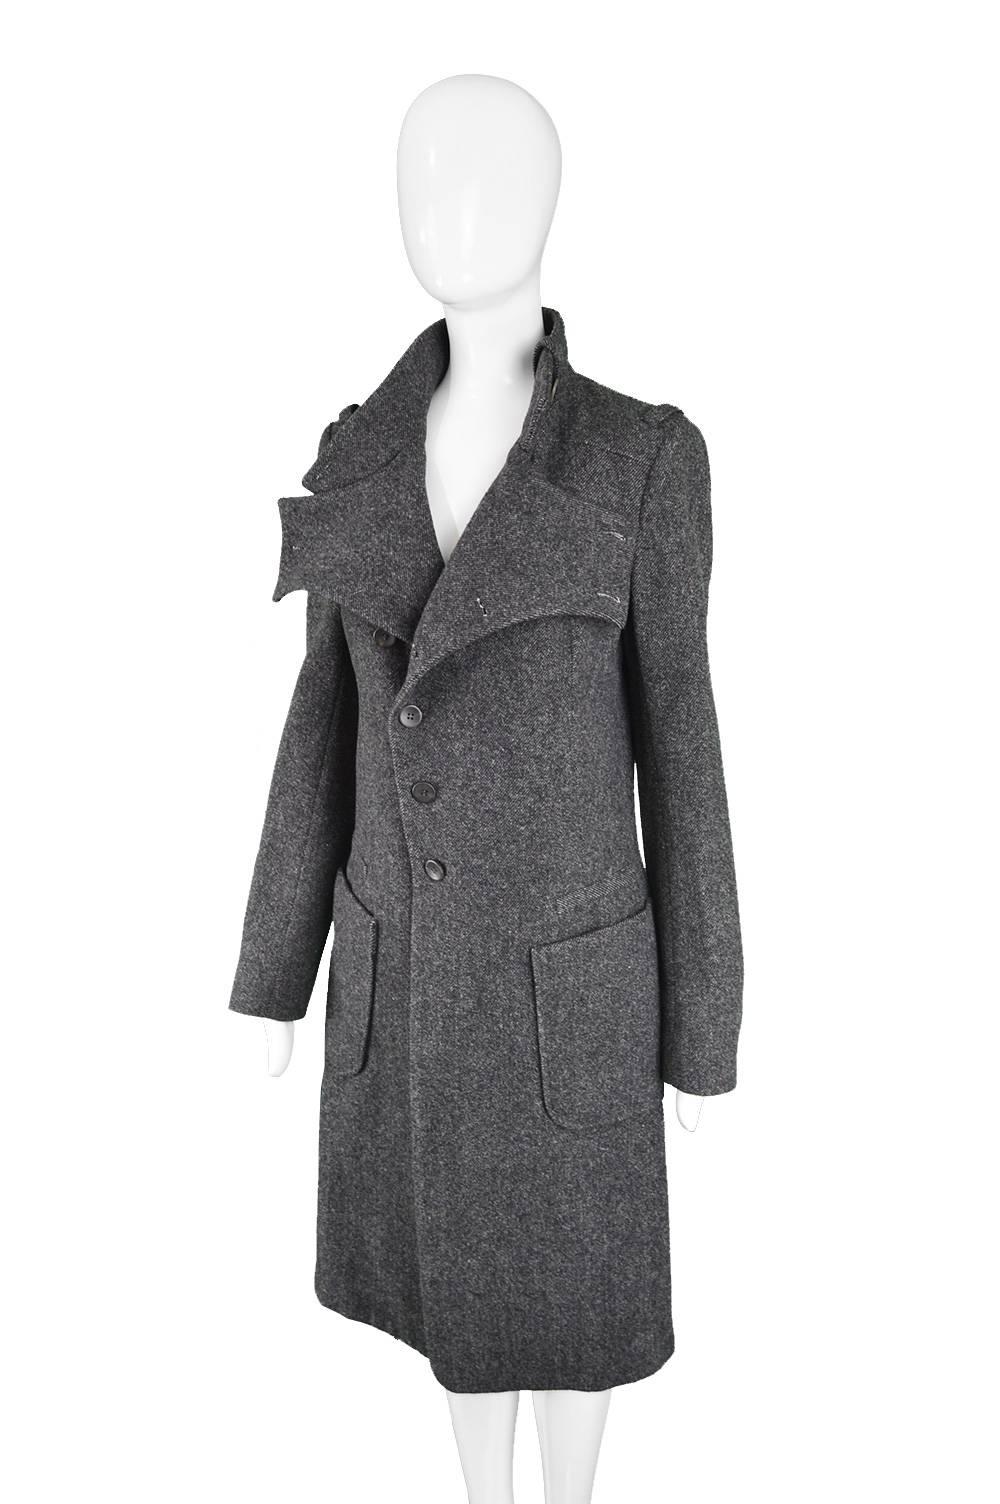 Balenciaga Nicolas Ghesquiere Gray Wool and Cashmere Military Style Coat, 2005 1